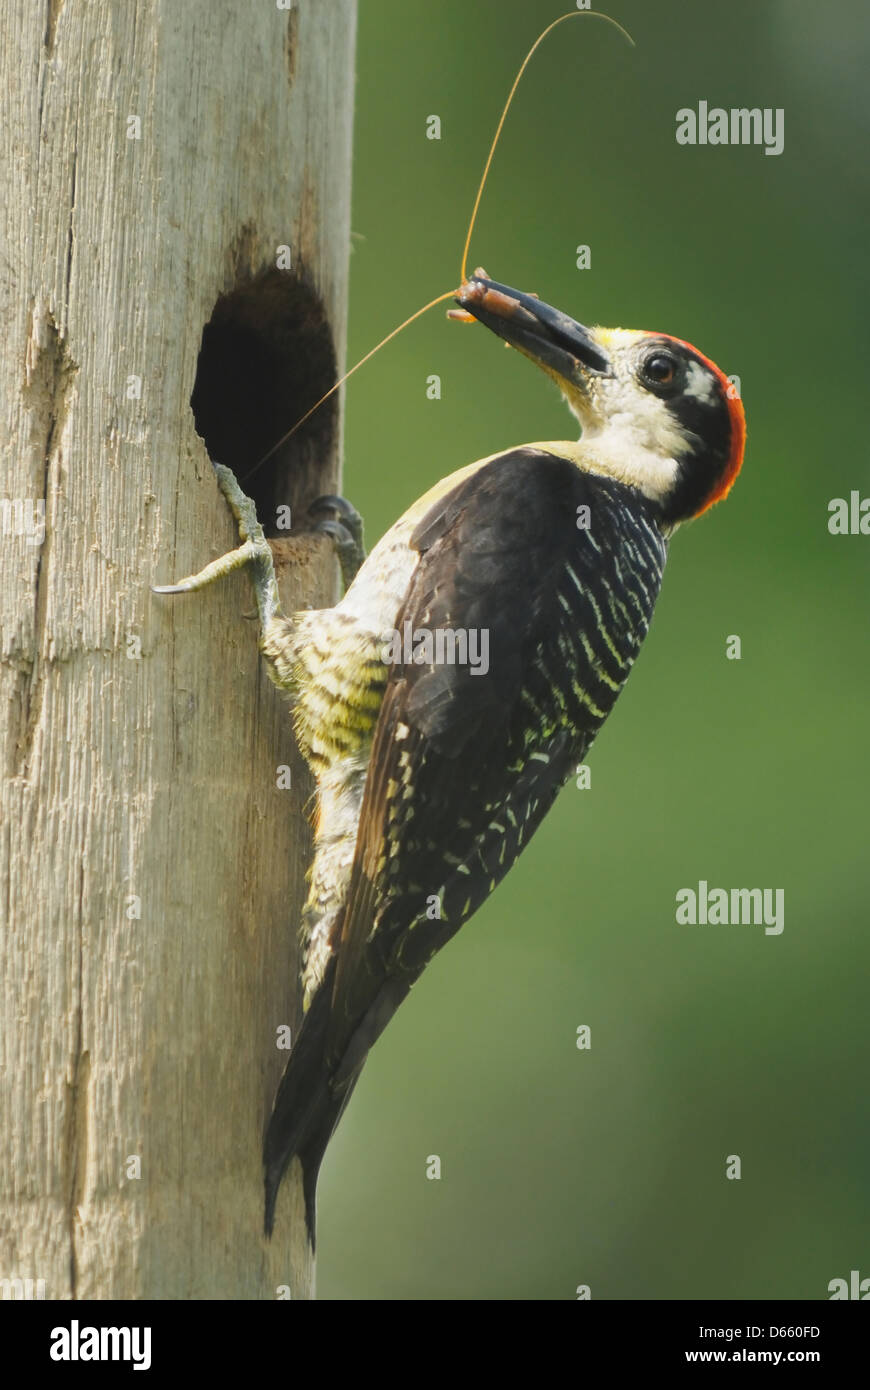 Male Black-cheeked Woodpecker (Melanerpes pucherani) with a cricket Stock Photo